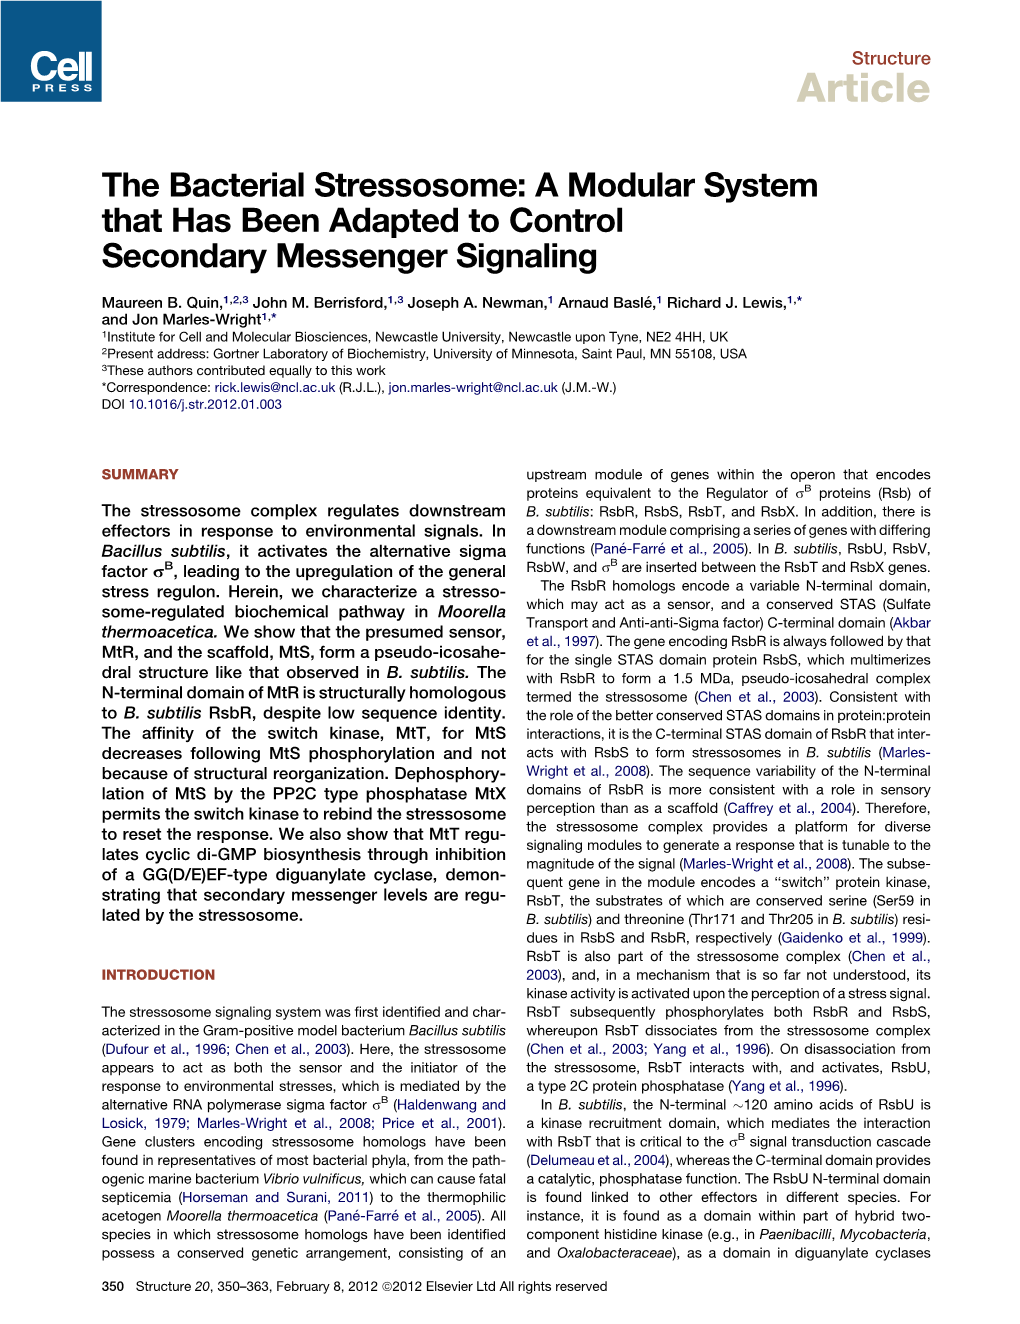 The Bacterial Stressosome: a Modular System That Has Been Adapted to Control Secondary Messenger Signaling